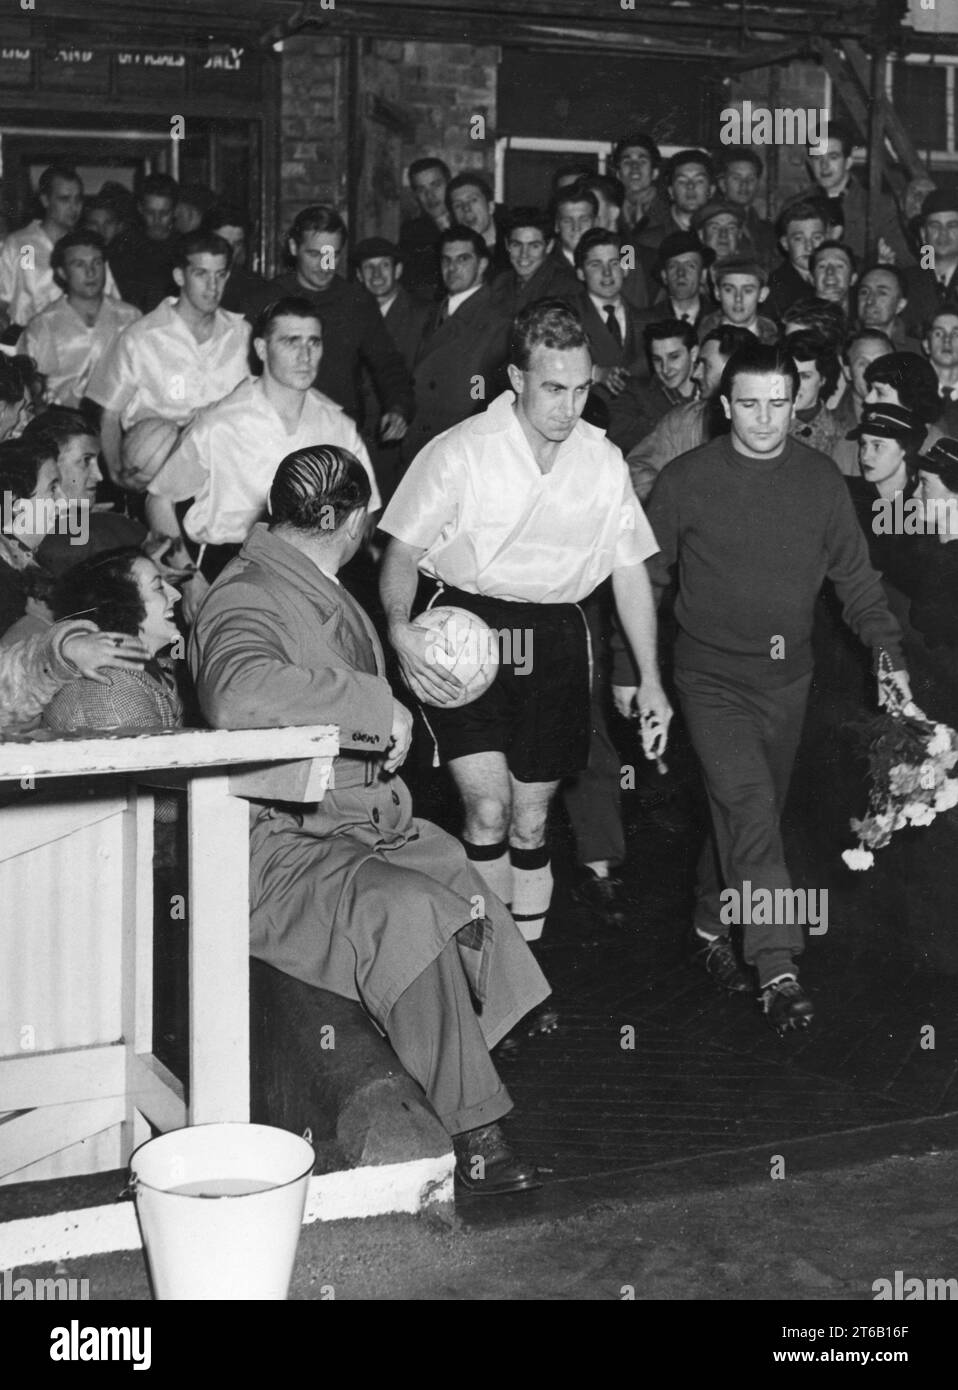 Wolverhampton Wanderers contro Honved FC Billy Wright e Ferenc Puskás guidano le squadre a Molineux nel 1954 Foto Stock